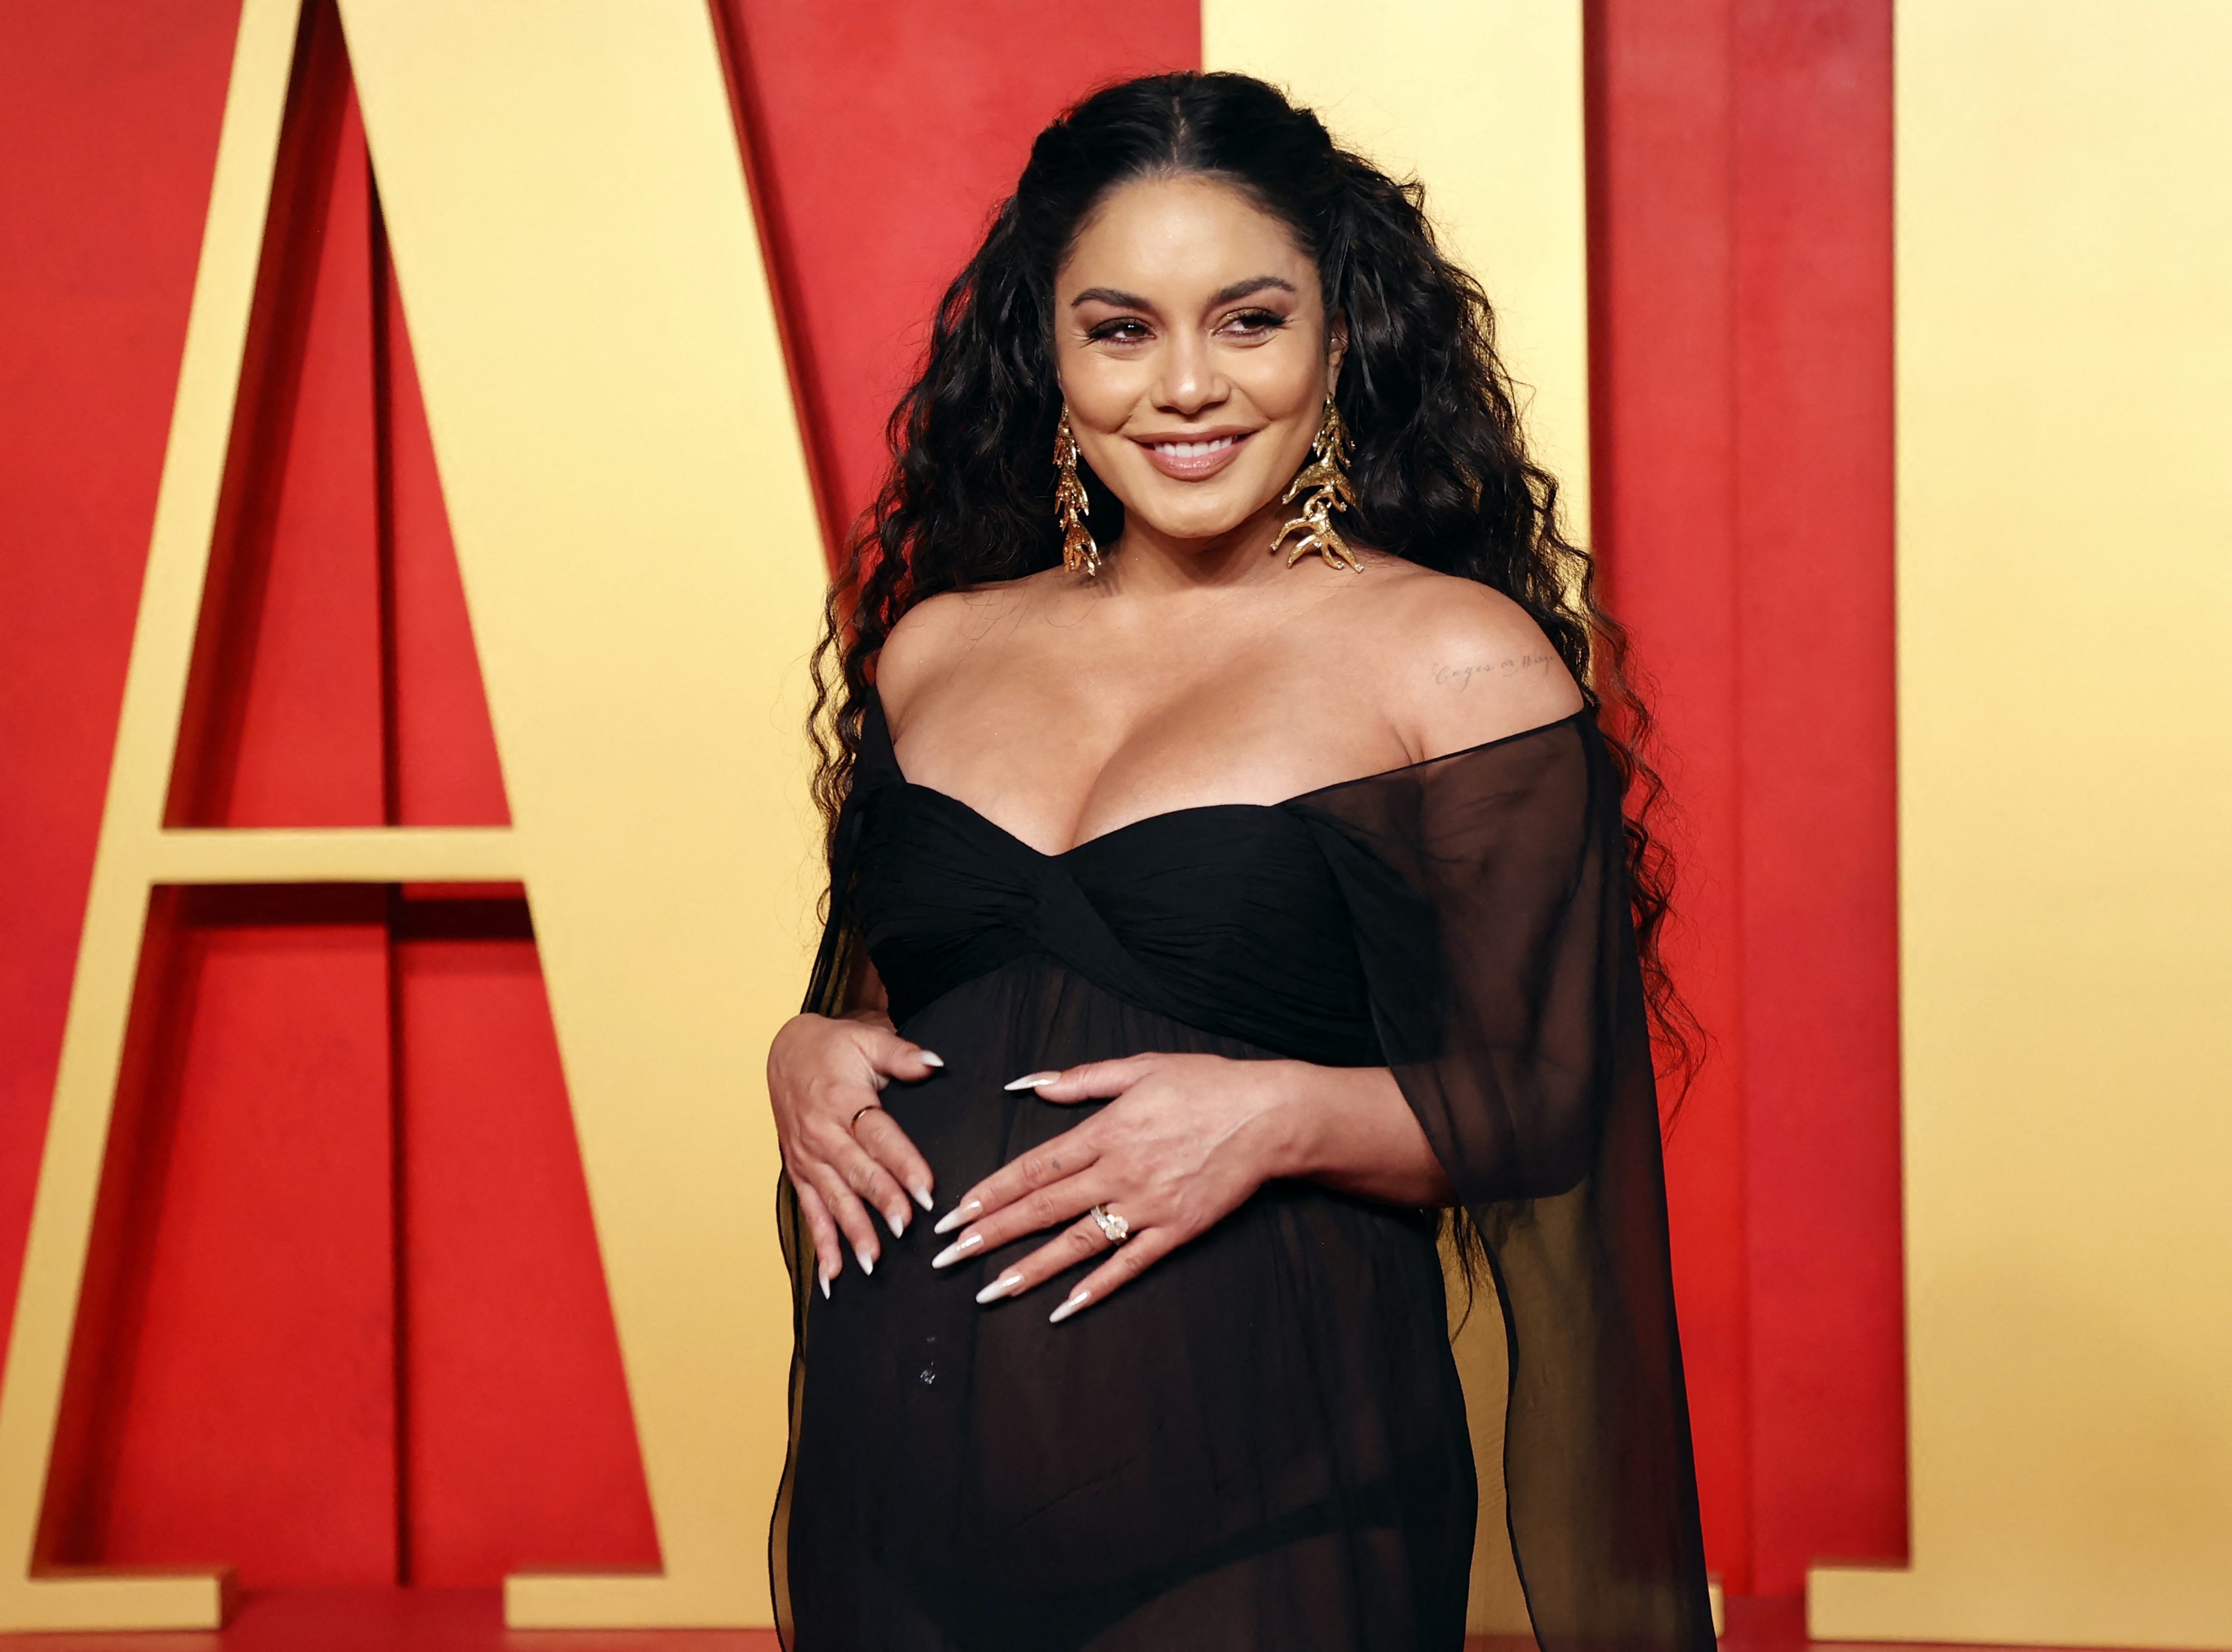 Vanessa Hudgens poses on the red carpet in a sheer dress, holding her baby bump and smiling